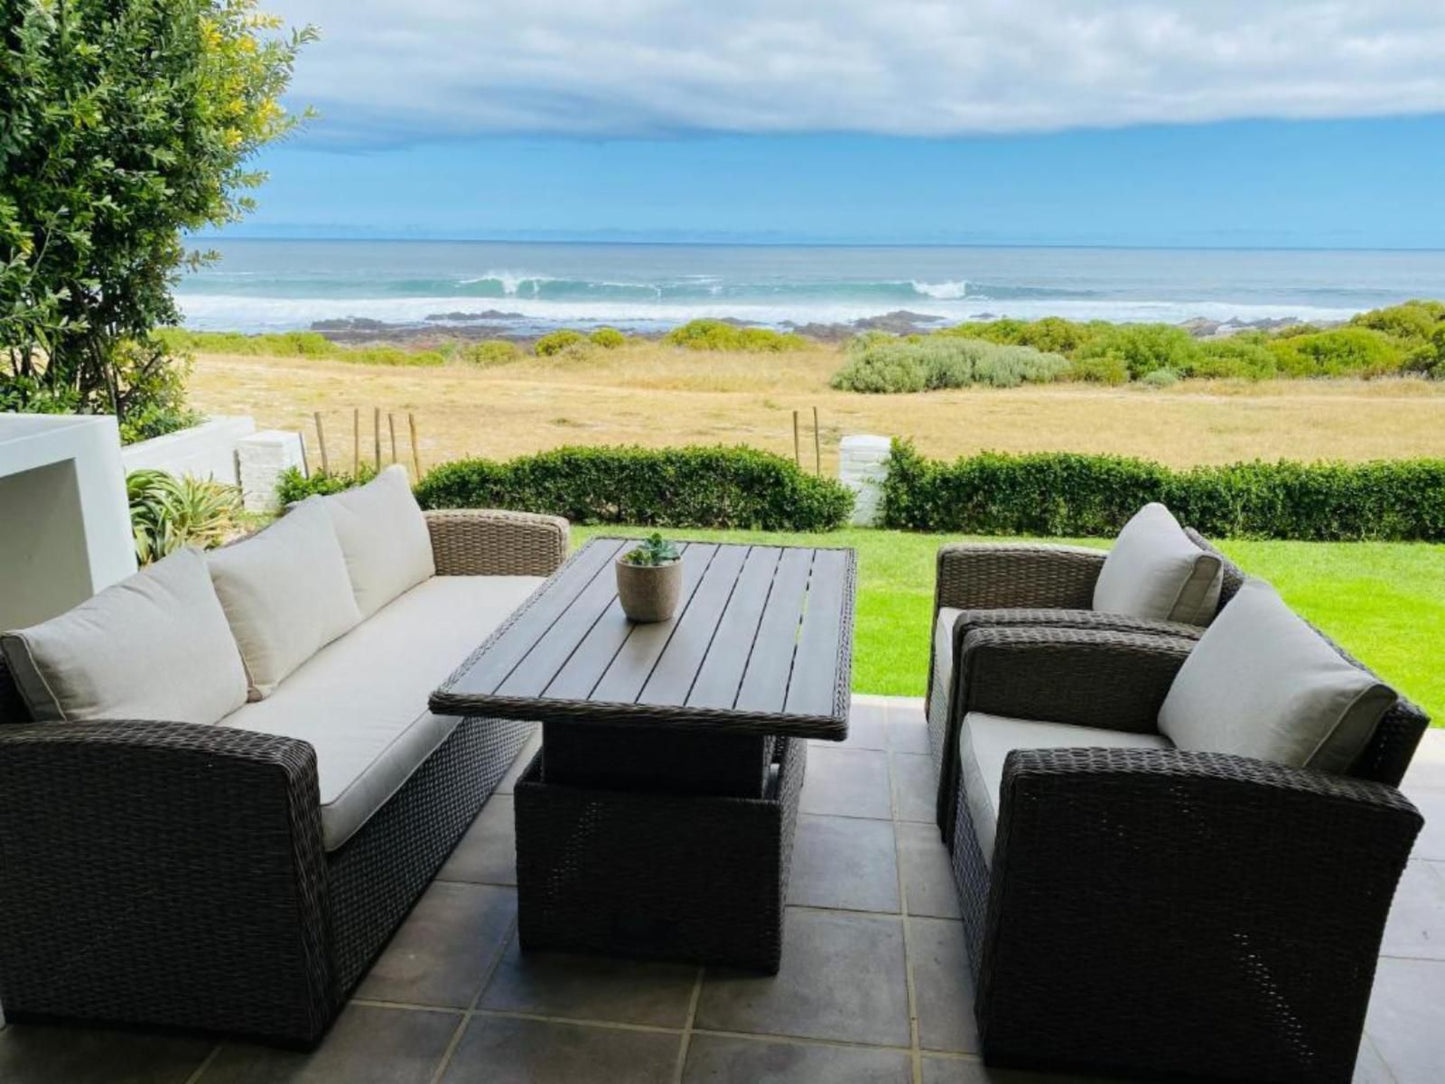 Shores Edge Cottage And Seapearl Ocean Front Villa Onrus Hermanus Western Cape South Africa Complementary Colors, Beach, Nature, Sand